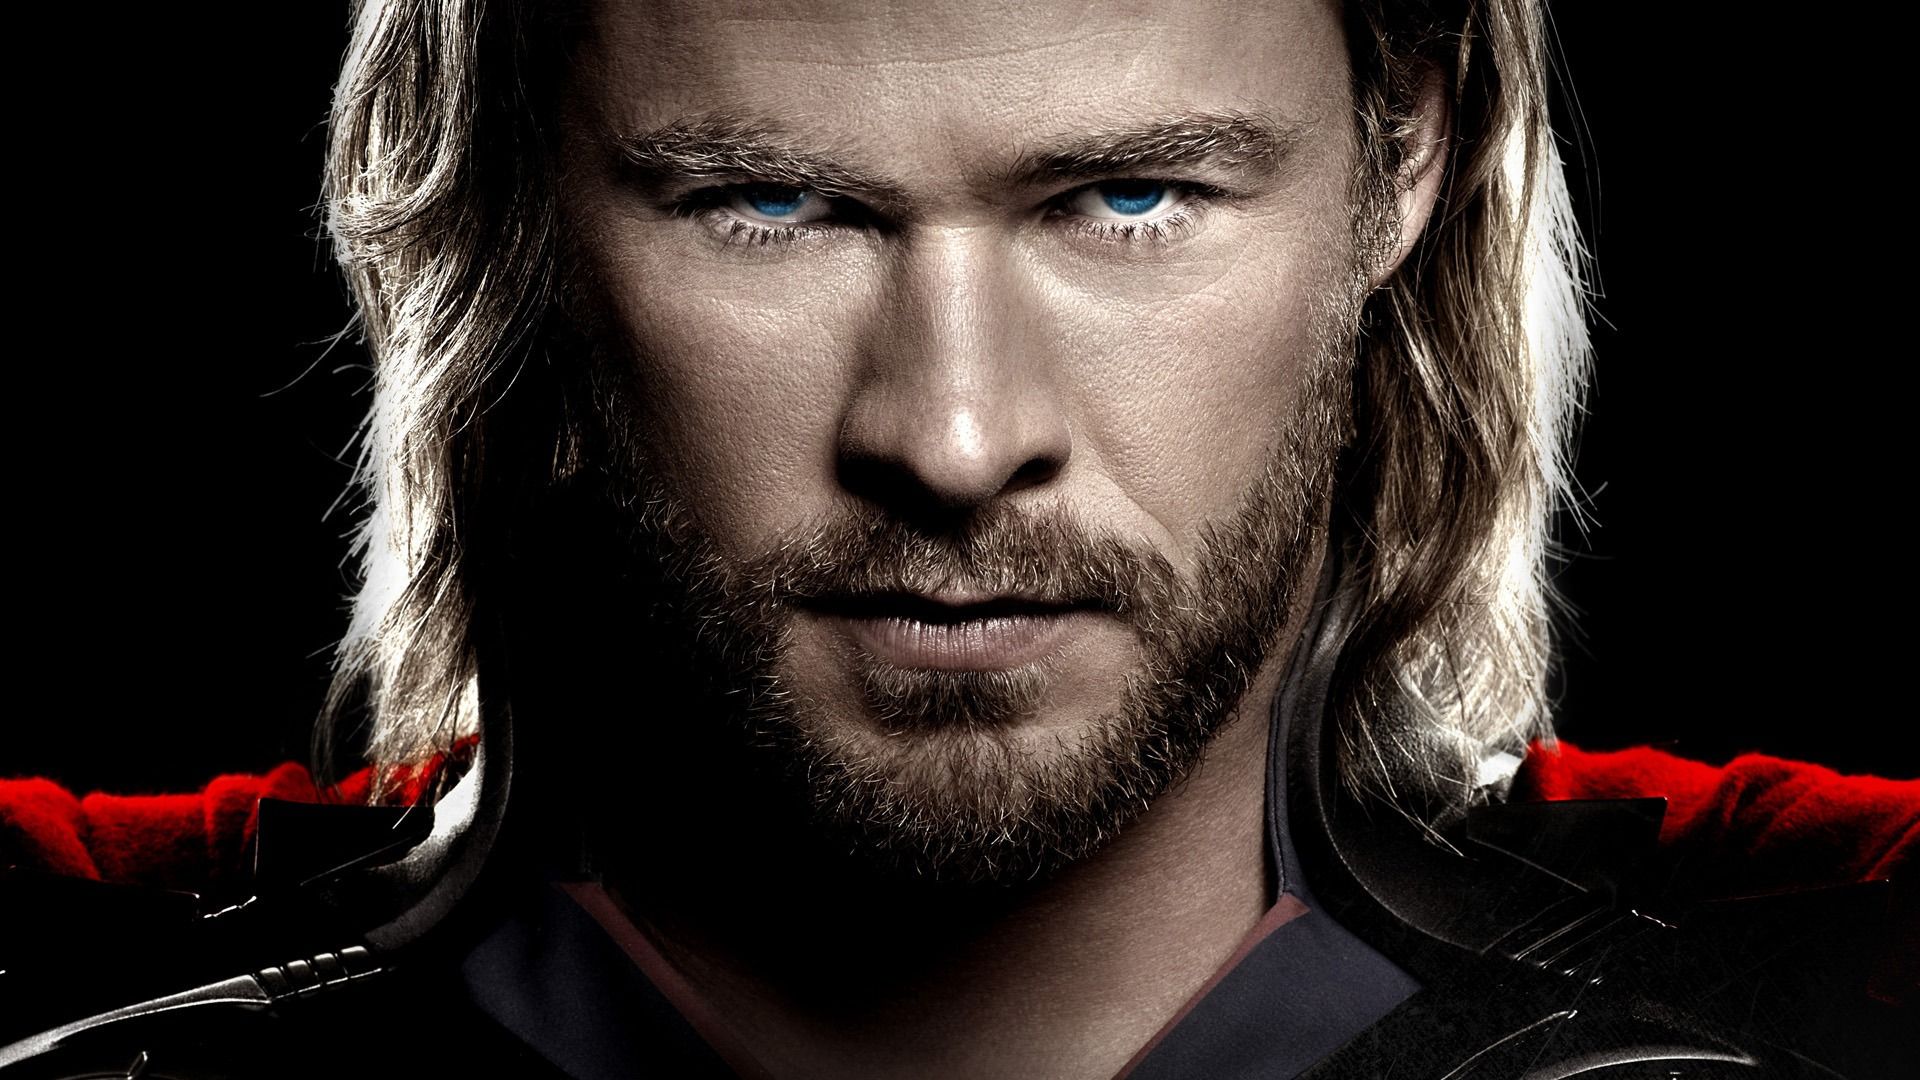 Thor HD wallpaper and background image